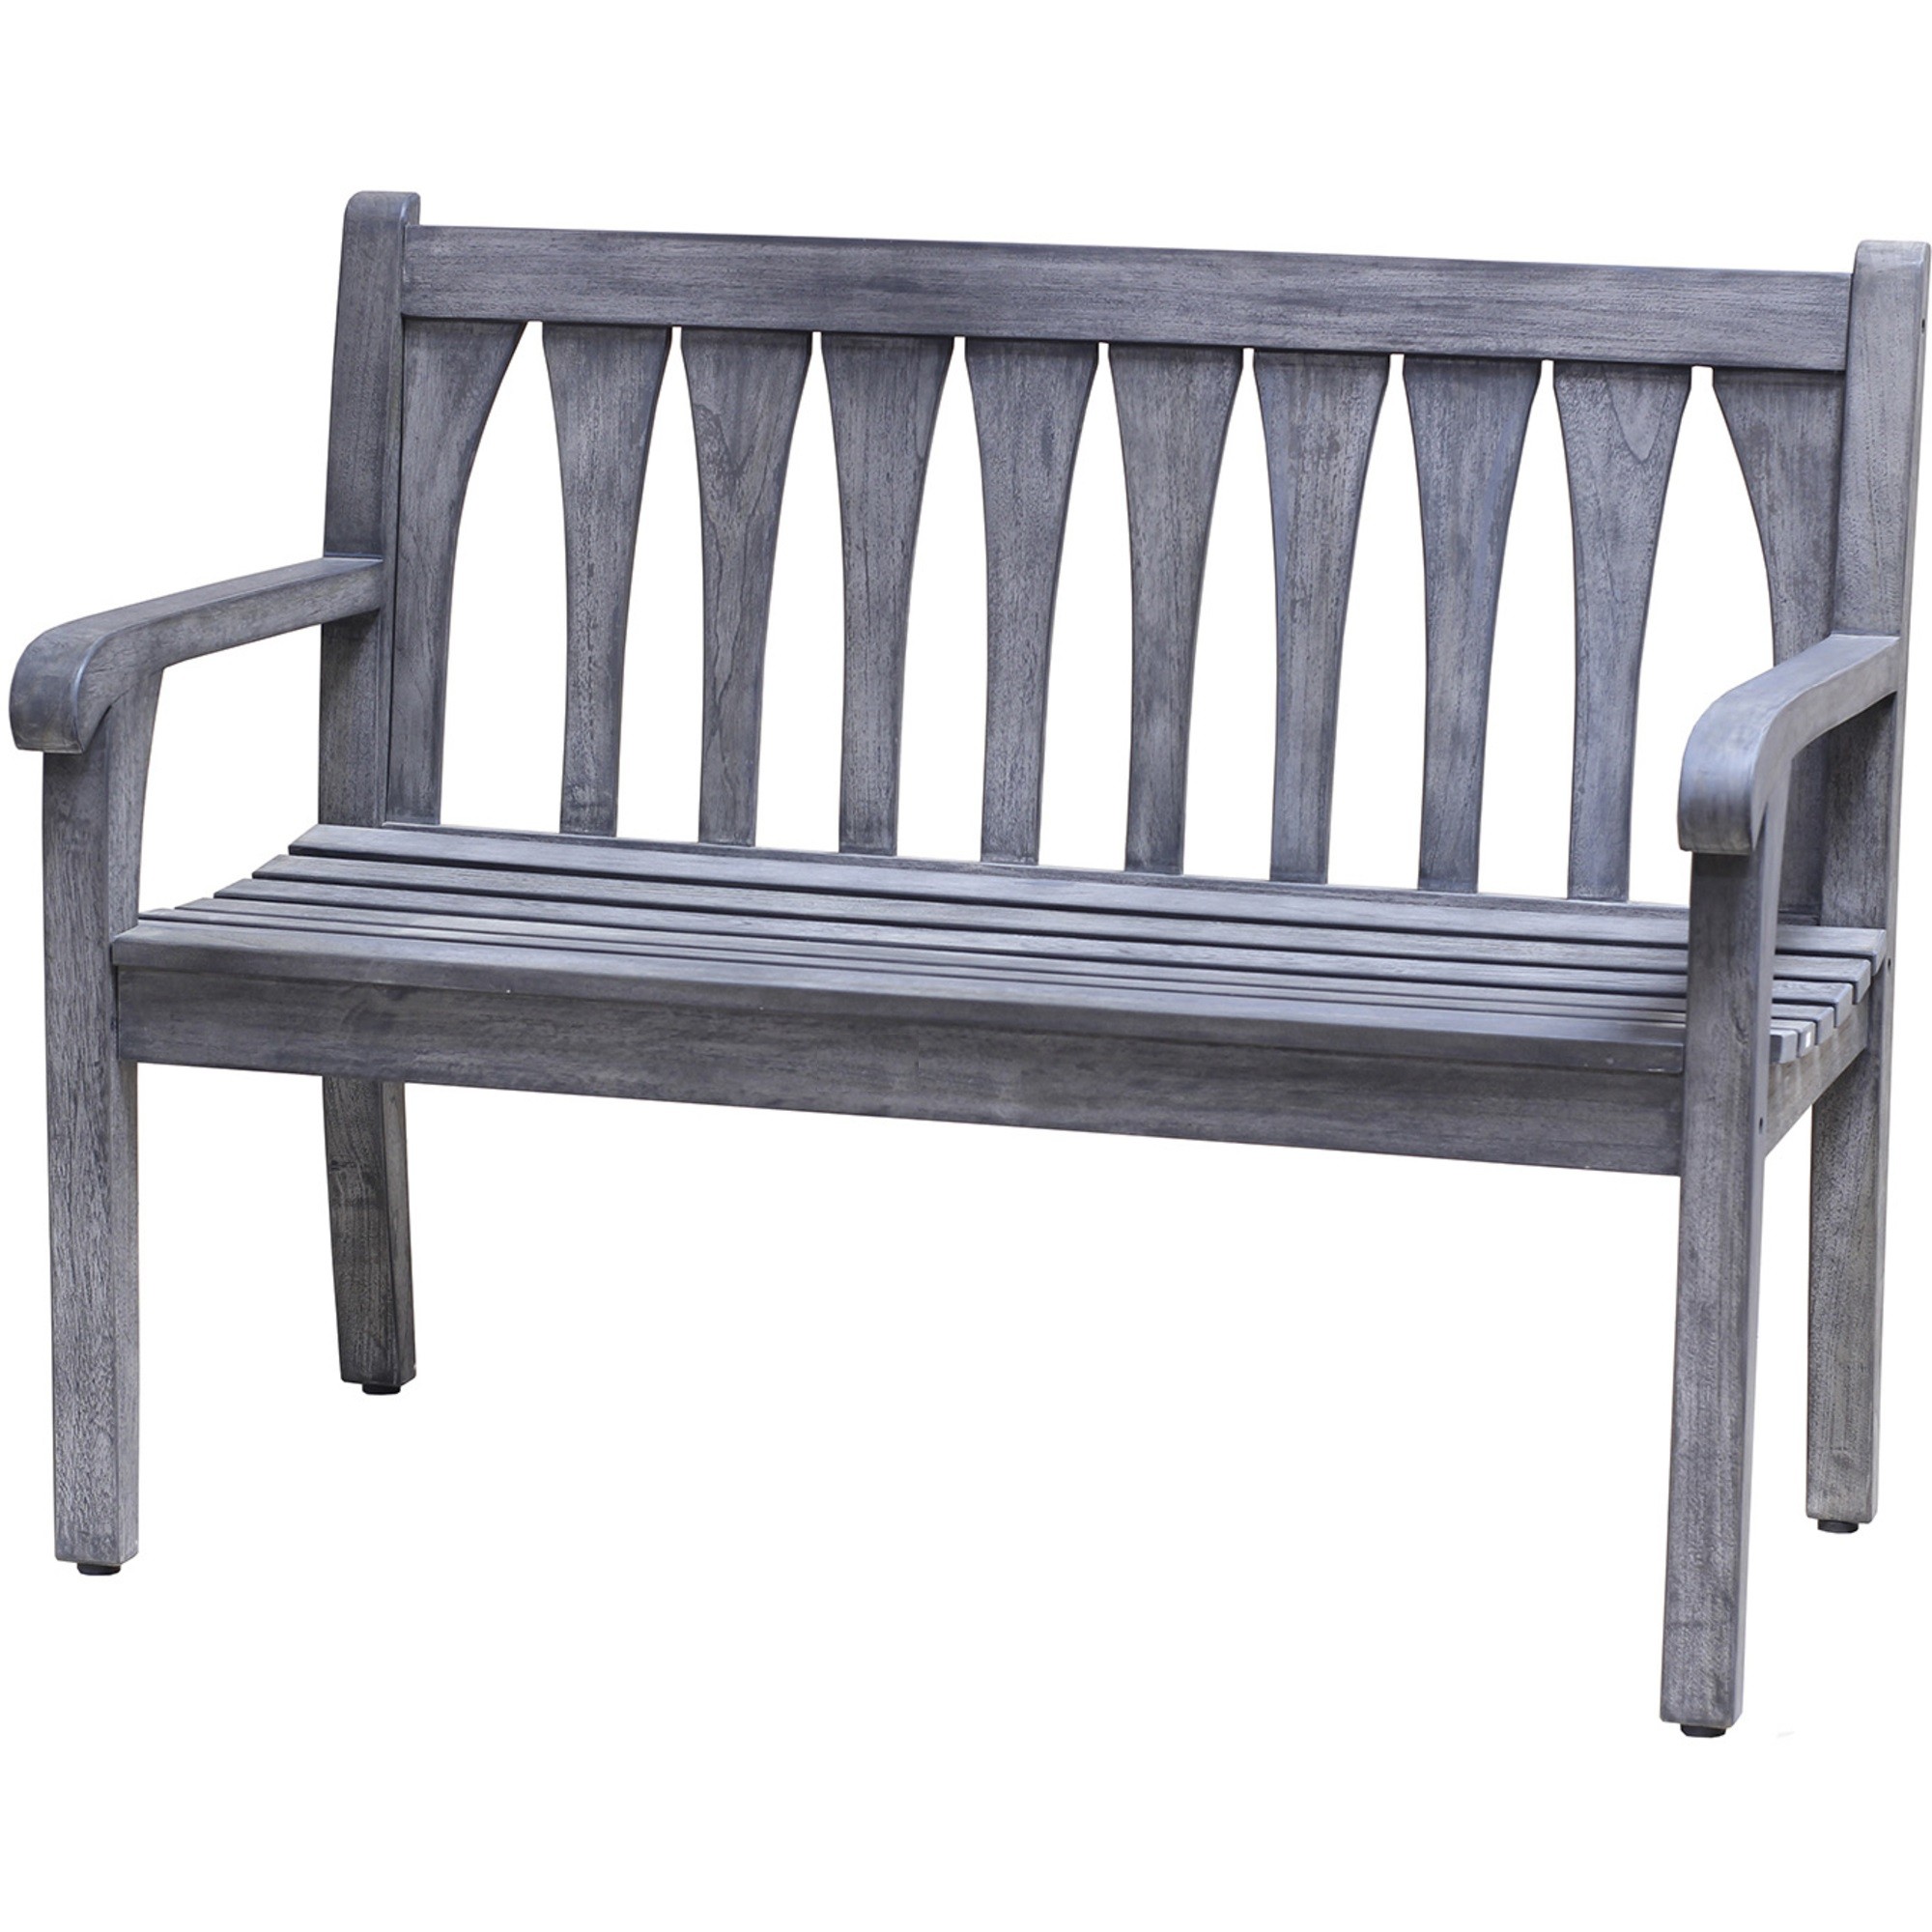 Compact Teak Outdoor Bench with Slattered Design in Coquina Gray Finish